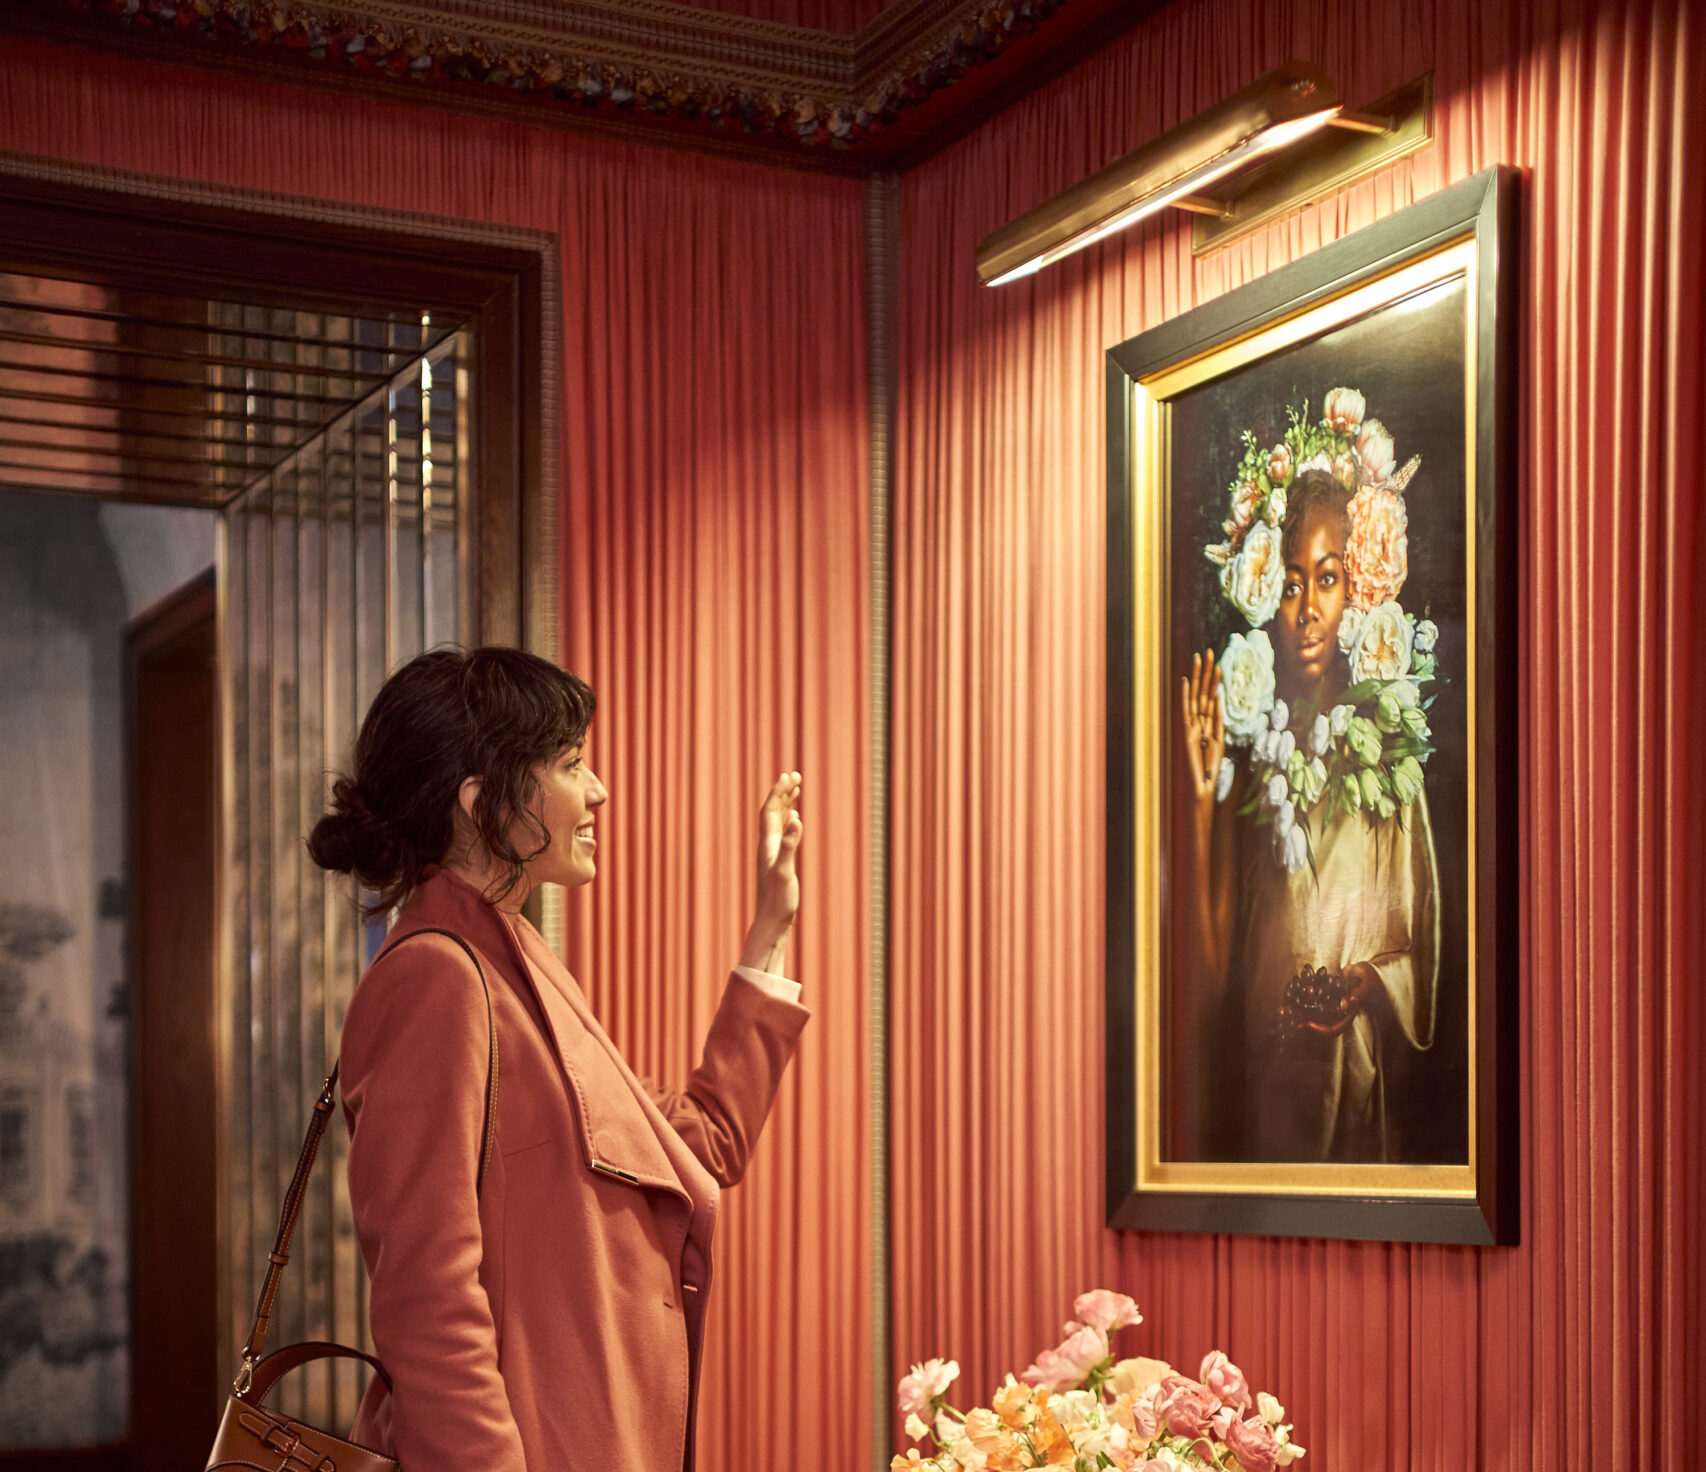 A lady in a pink jacket raises her hand toward the beautiful wall-mounted portrait.